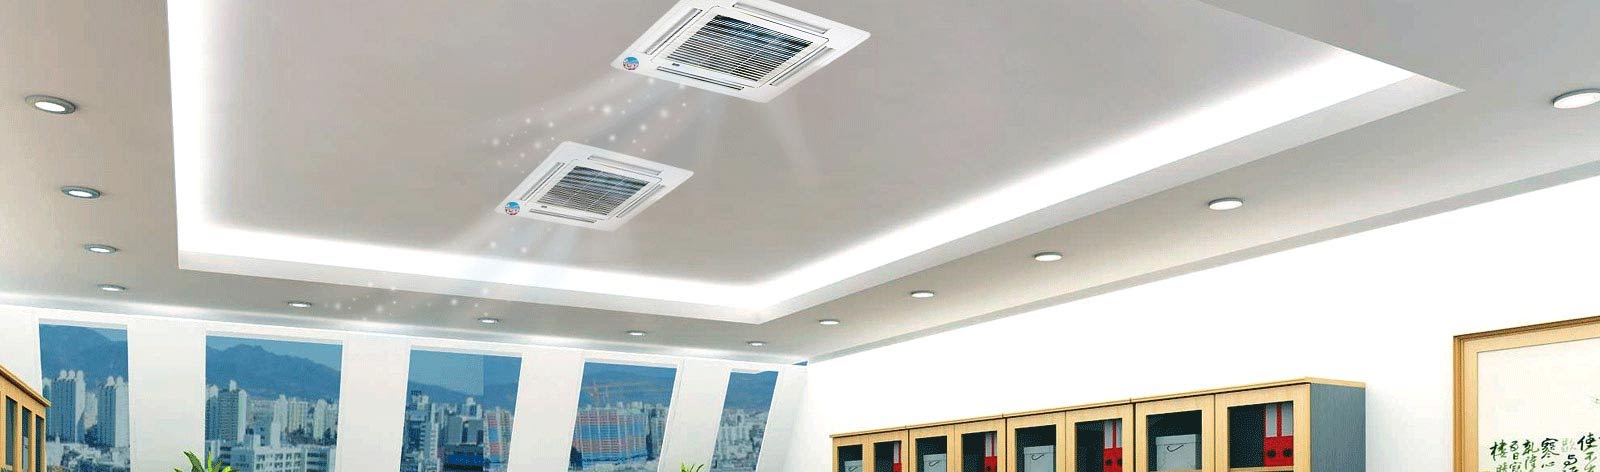 What is a ceiling air conditioner?